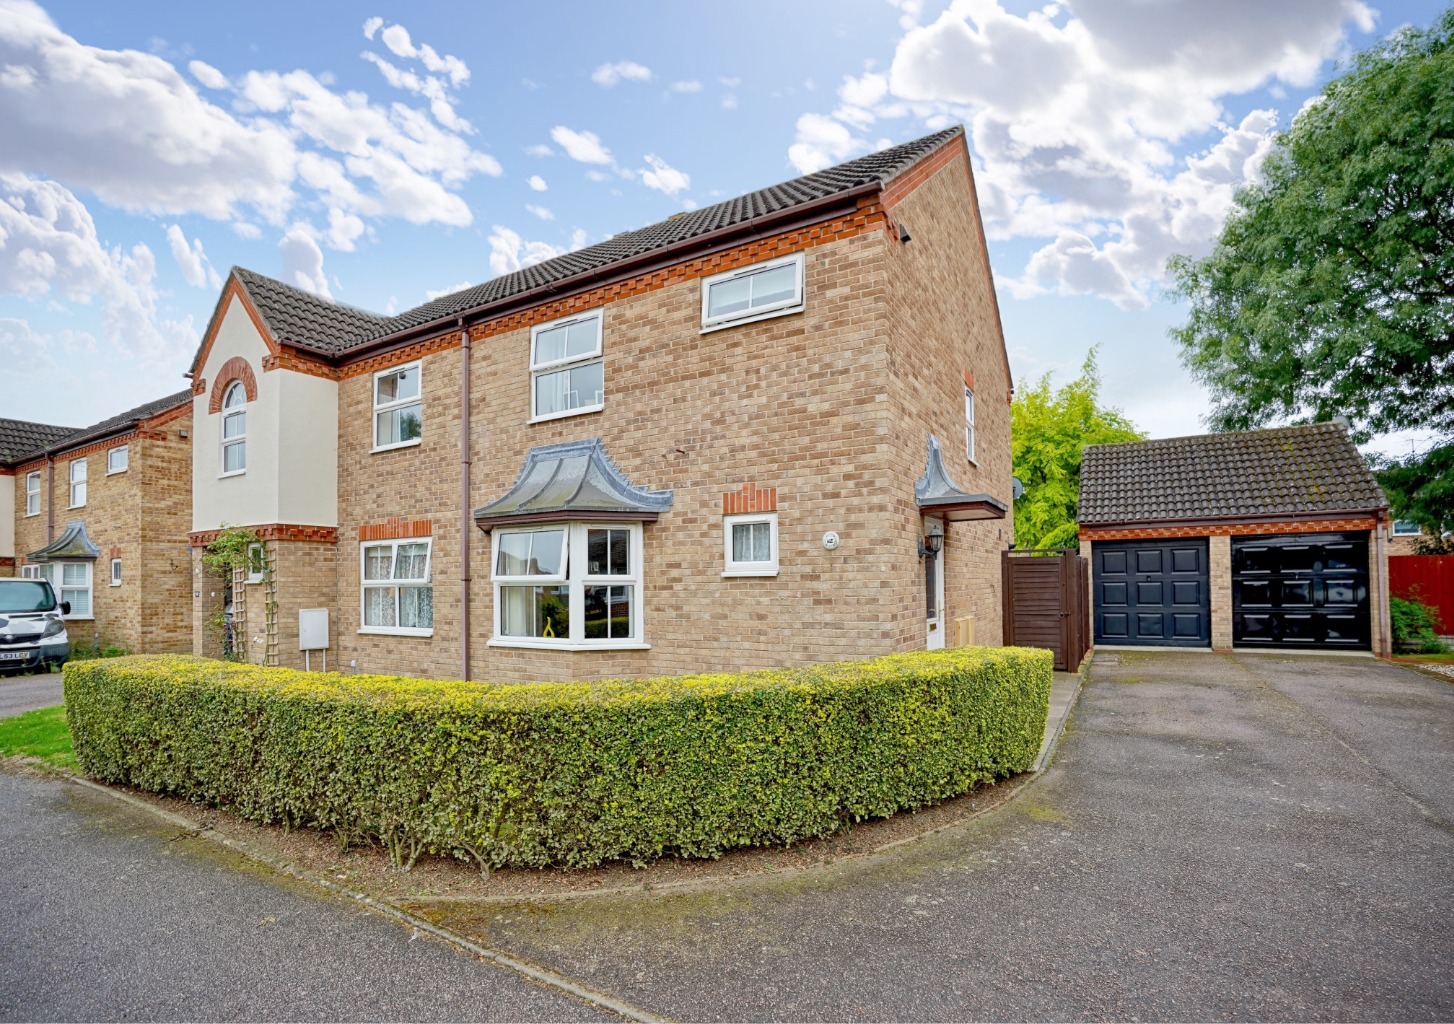 3 bed semi-detached house for sale in Capulet Close, St Neots - Property Image 1